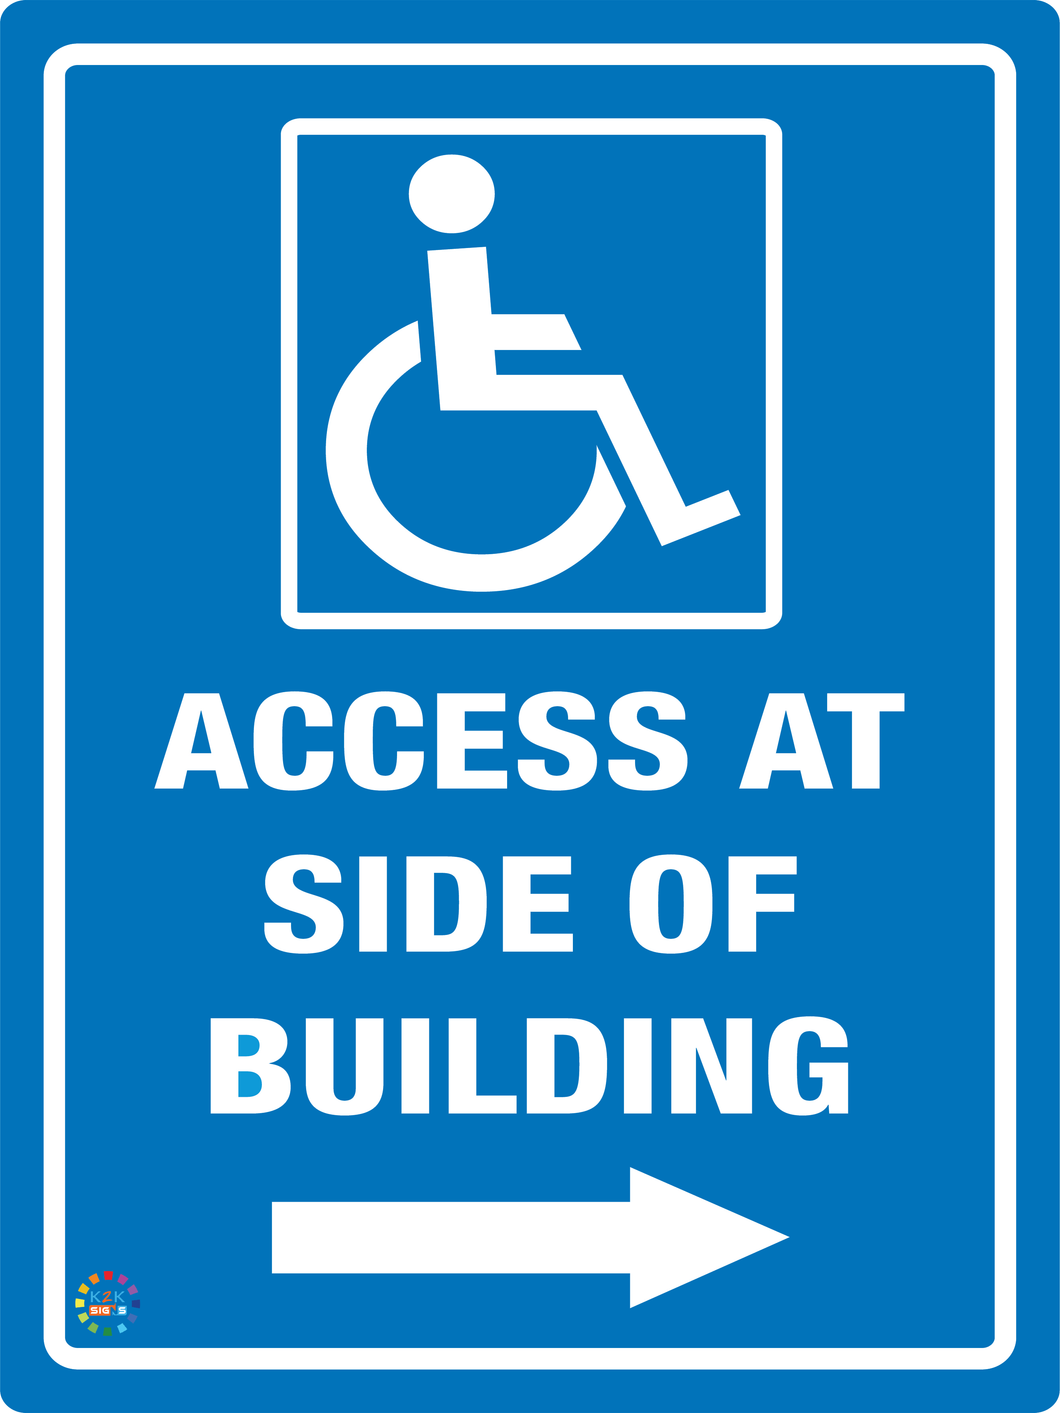 Access At Side Of Building (Right Arrow) Sign